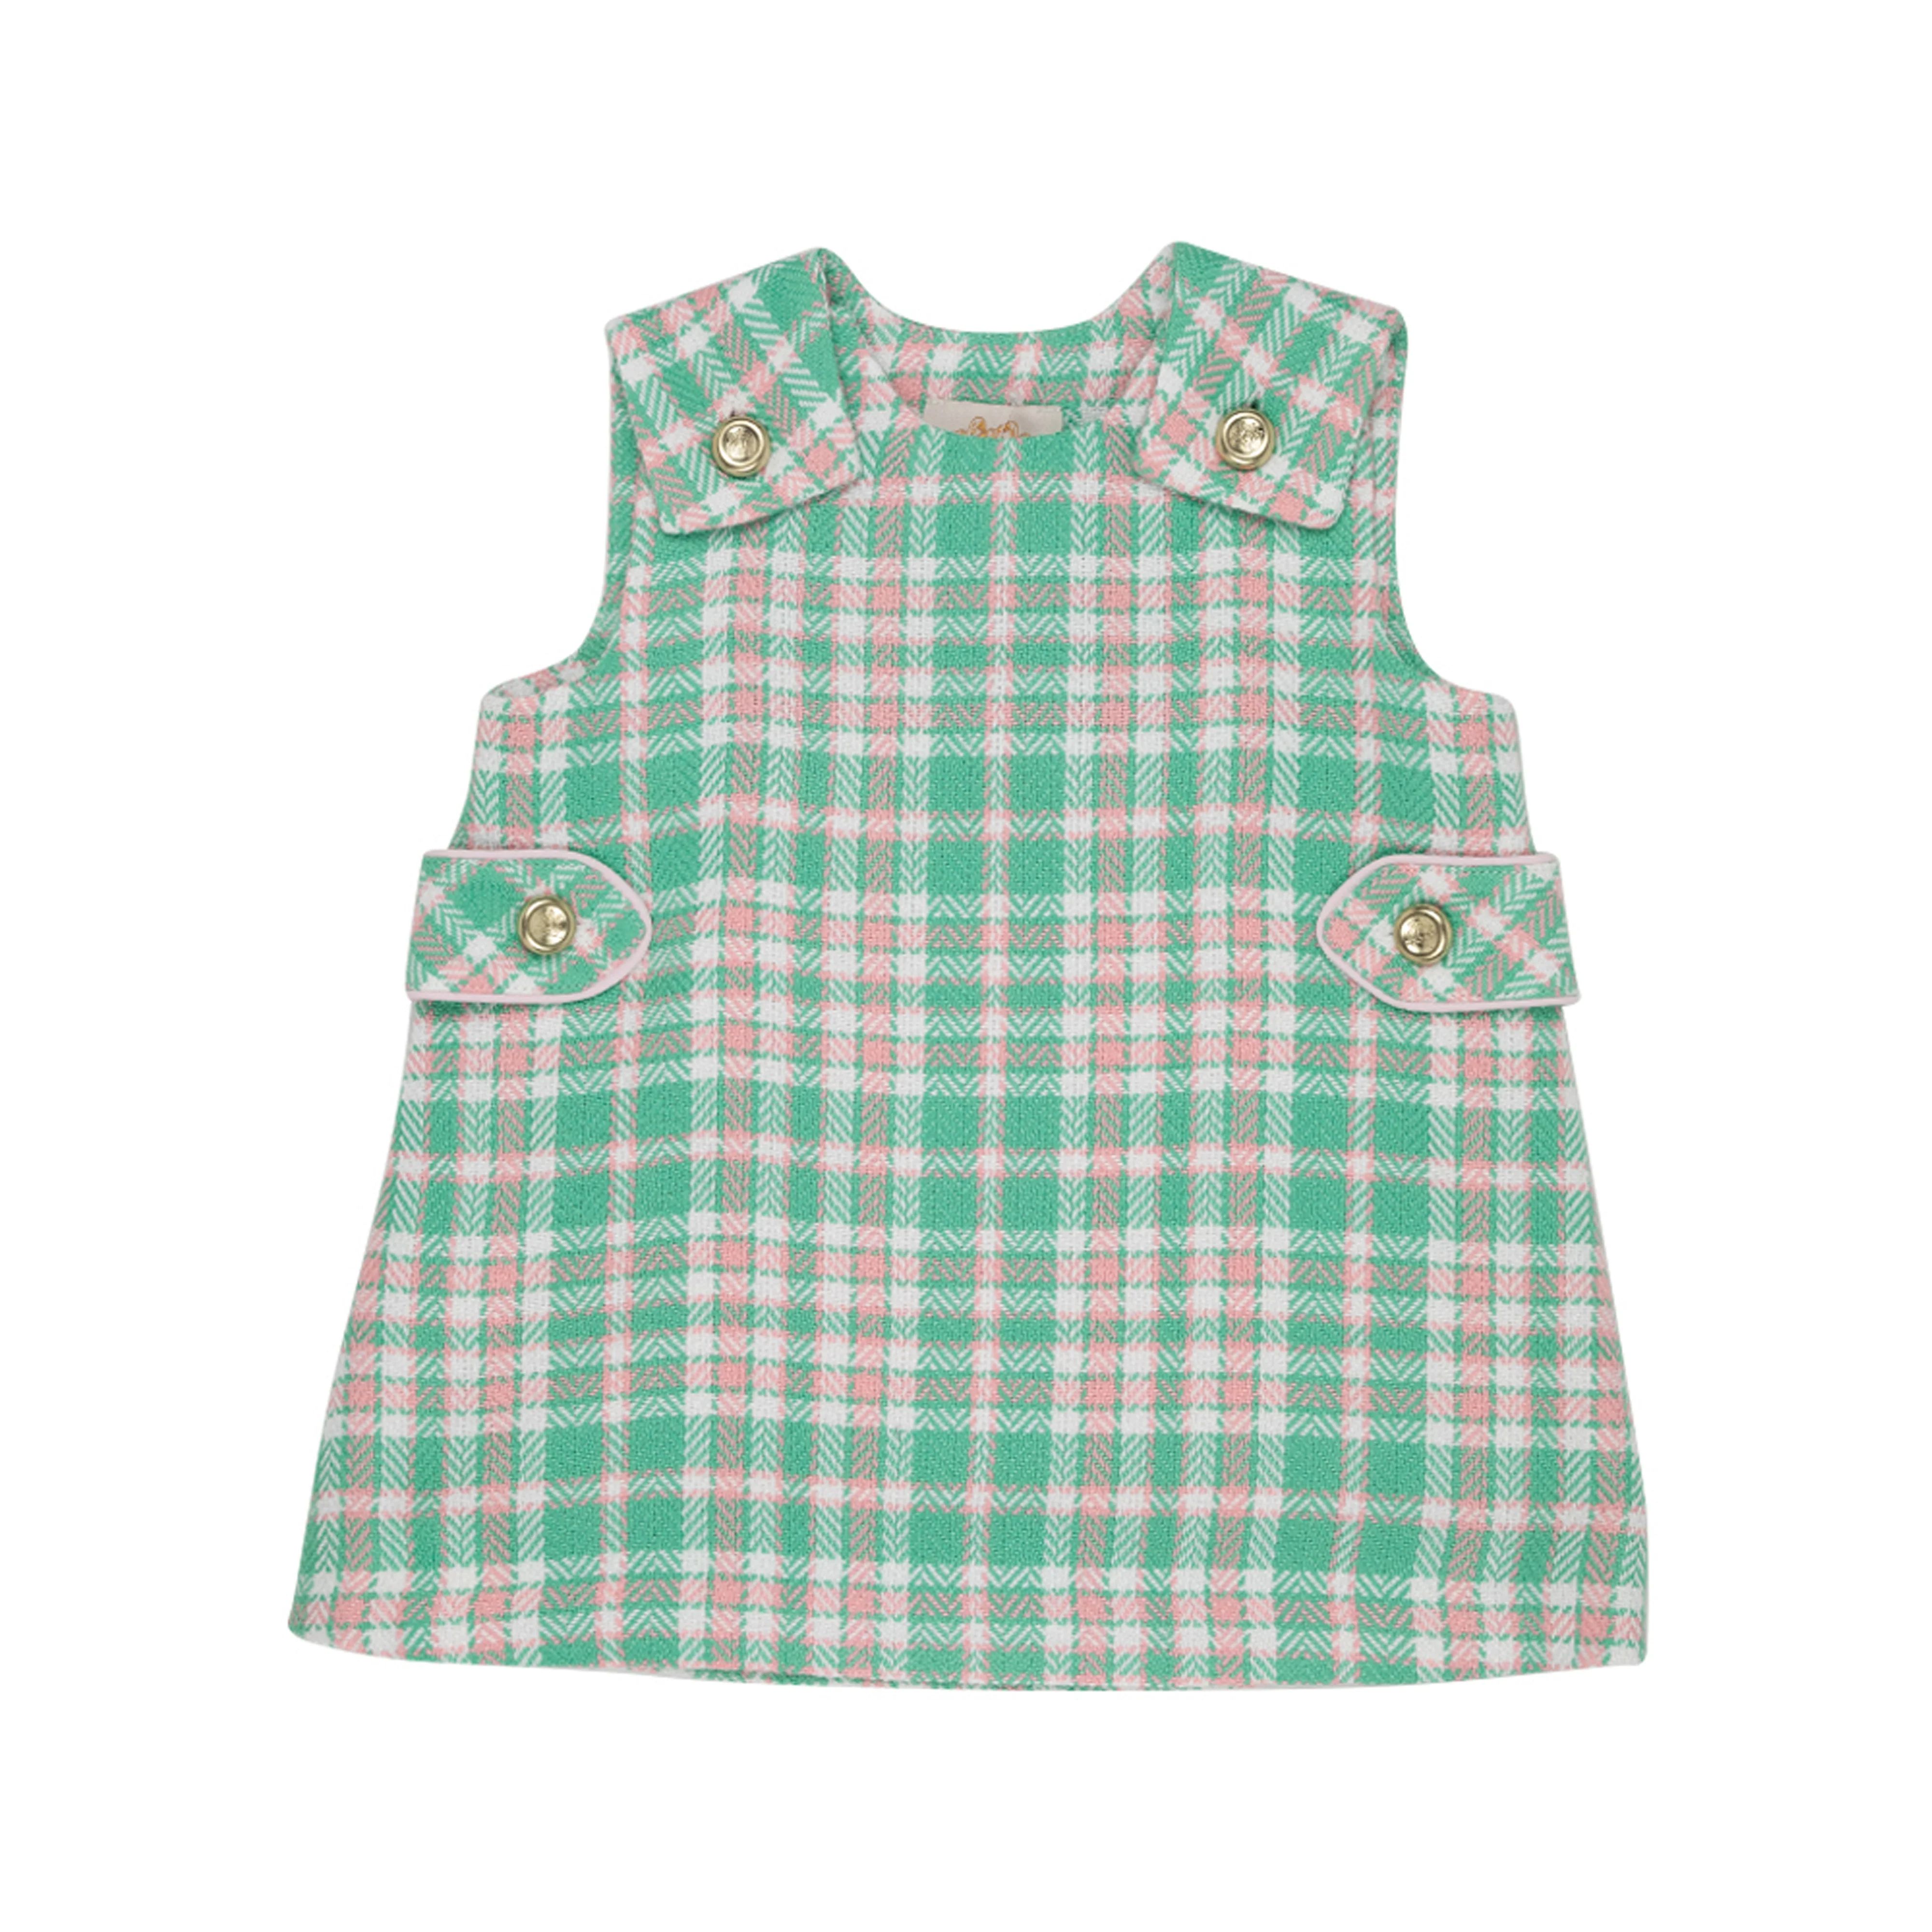 Janie Jumper - Putney Plaid with Palm Beach Pink | The Beaufort Bonnet Company